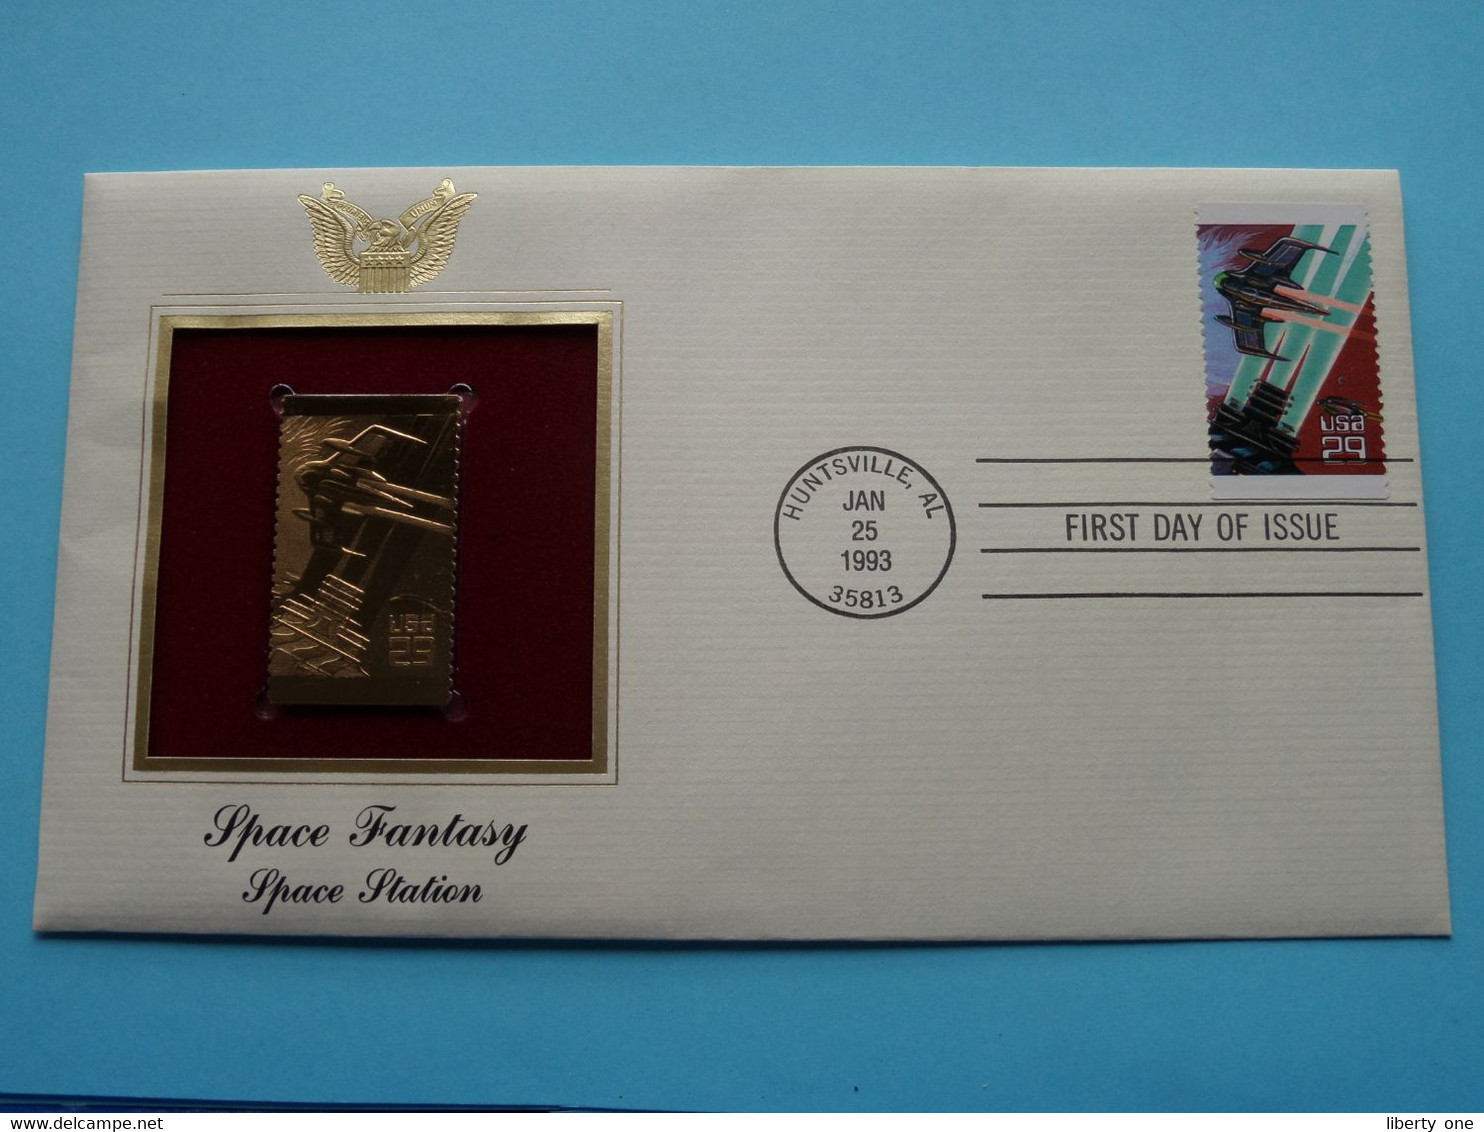 SPACE FANTASY - SPACE STATION ( 22kt Gold Stamp Replica ) First Day Of Issue 1993 > HUNTSVILLE, Al, USA ! - 1991-2000